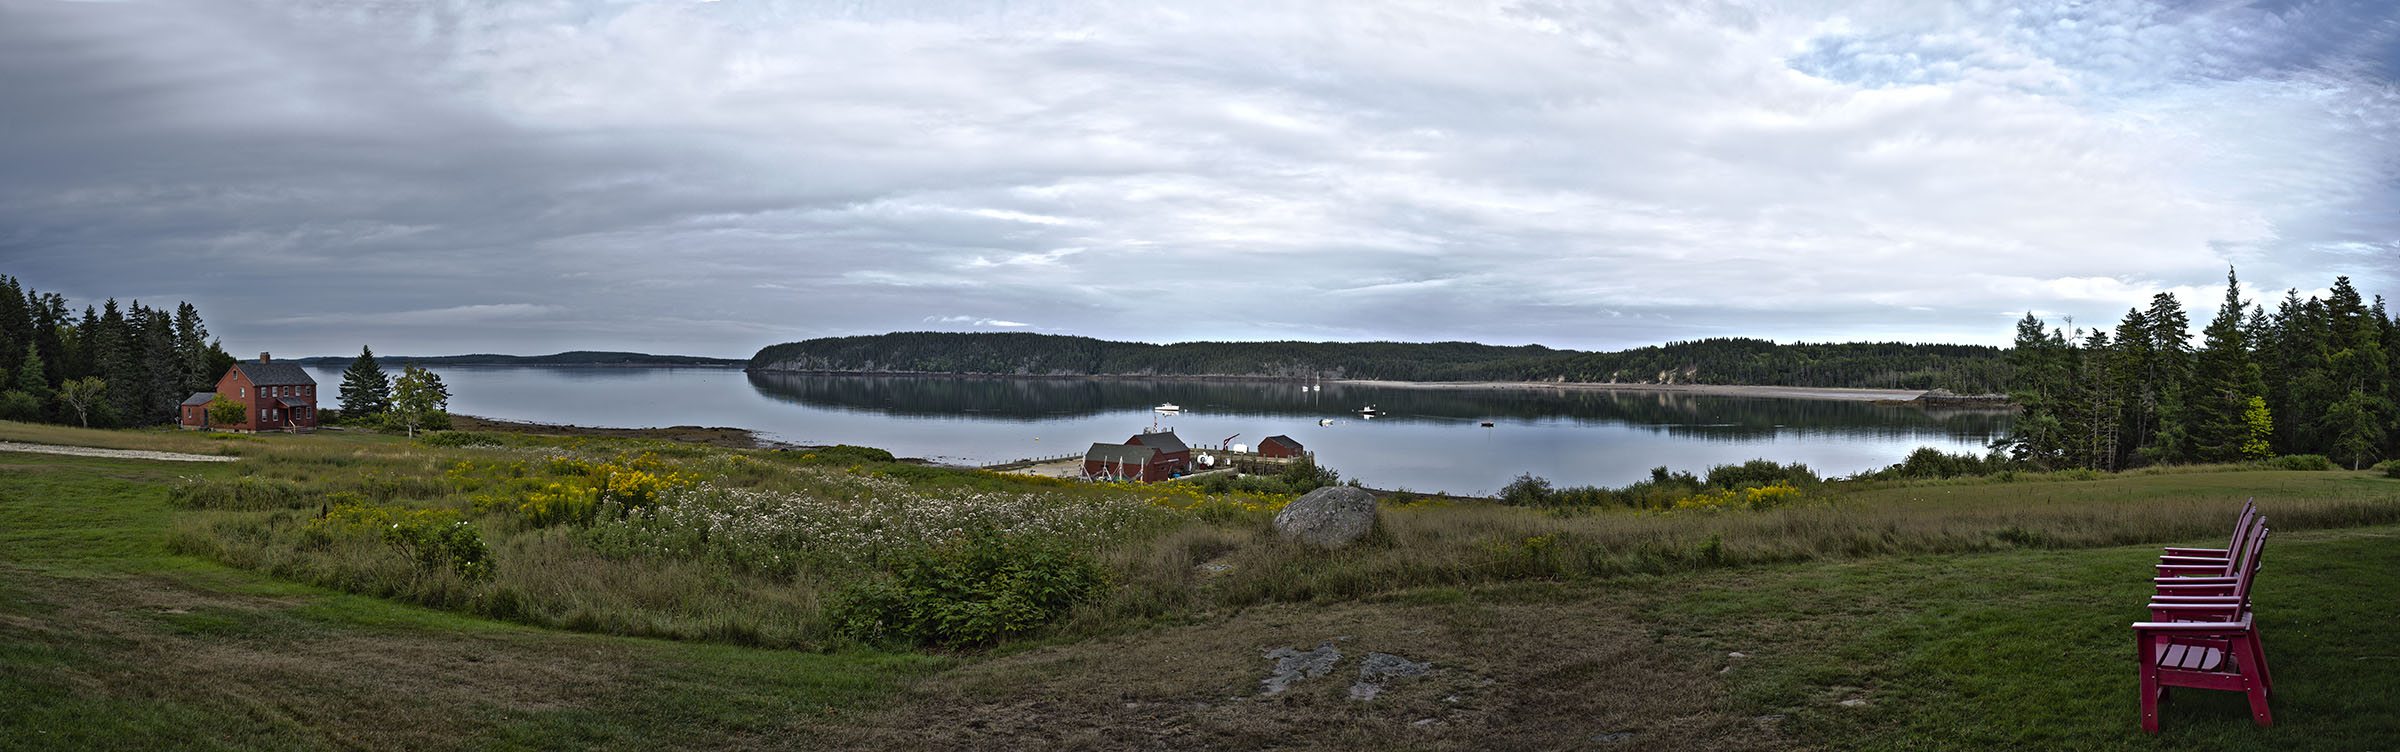 The Island Roque Downeast Maine Cutler Wide Pan View from House 62 inch Panorama Wick Beavers Best Architectural Photographer NYC LA